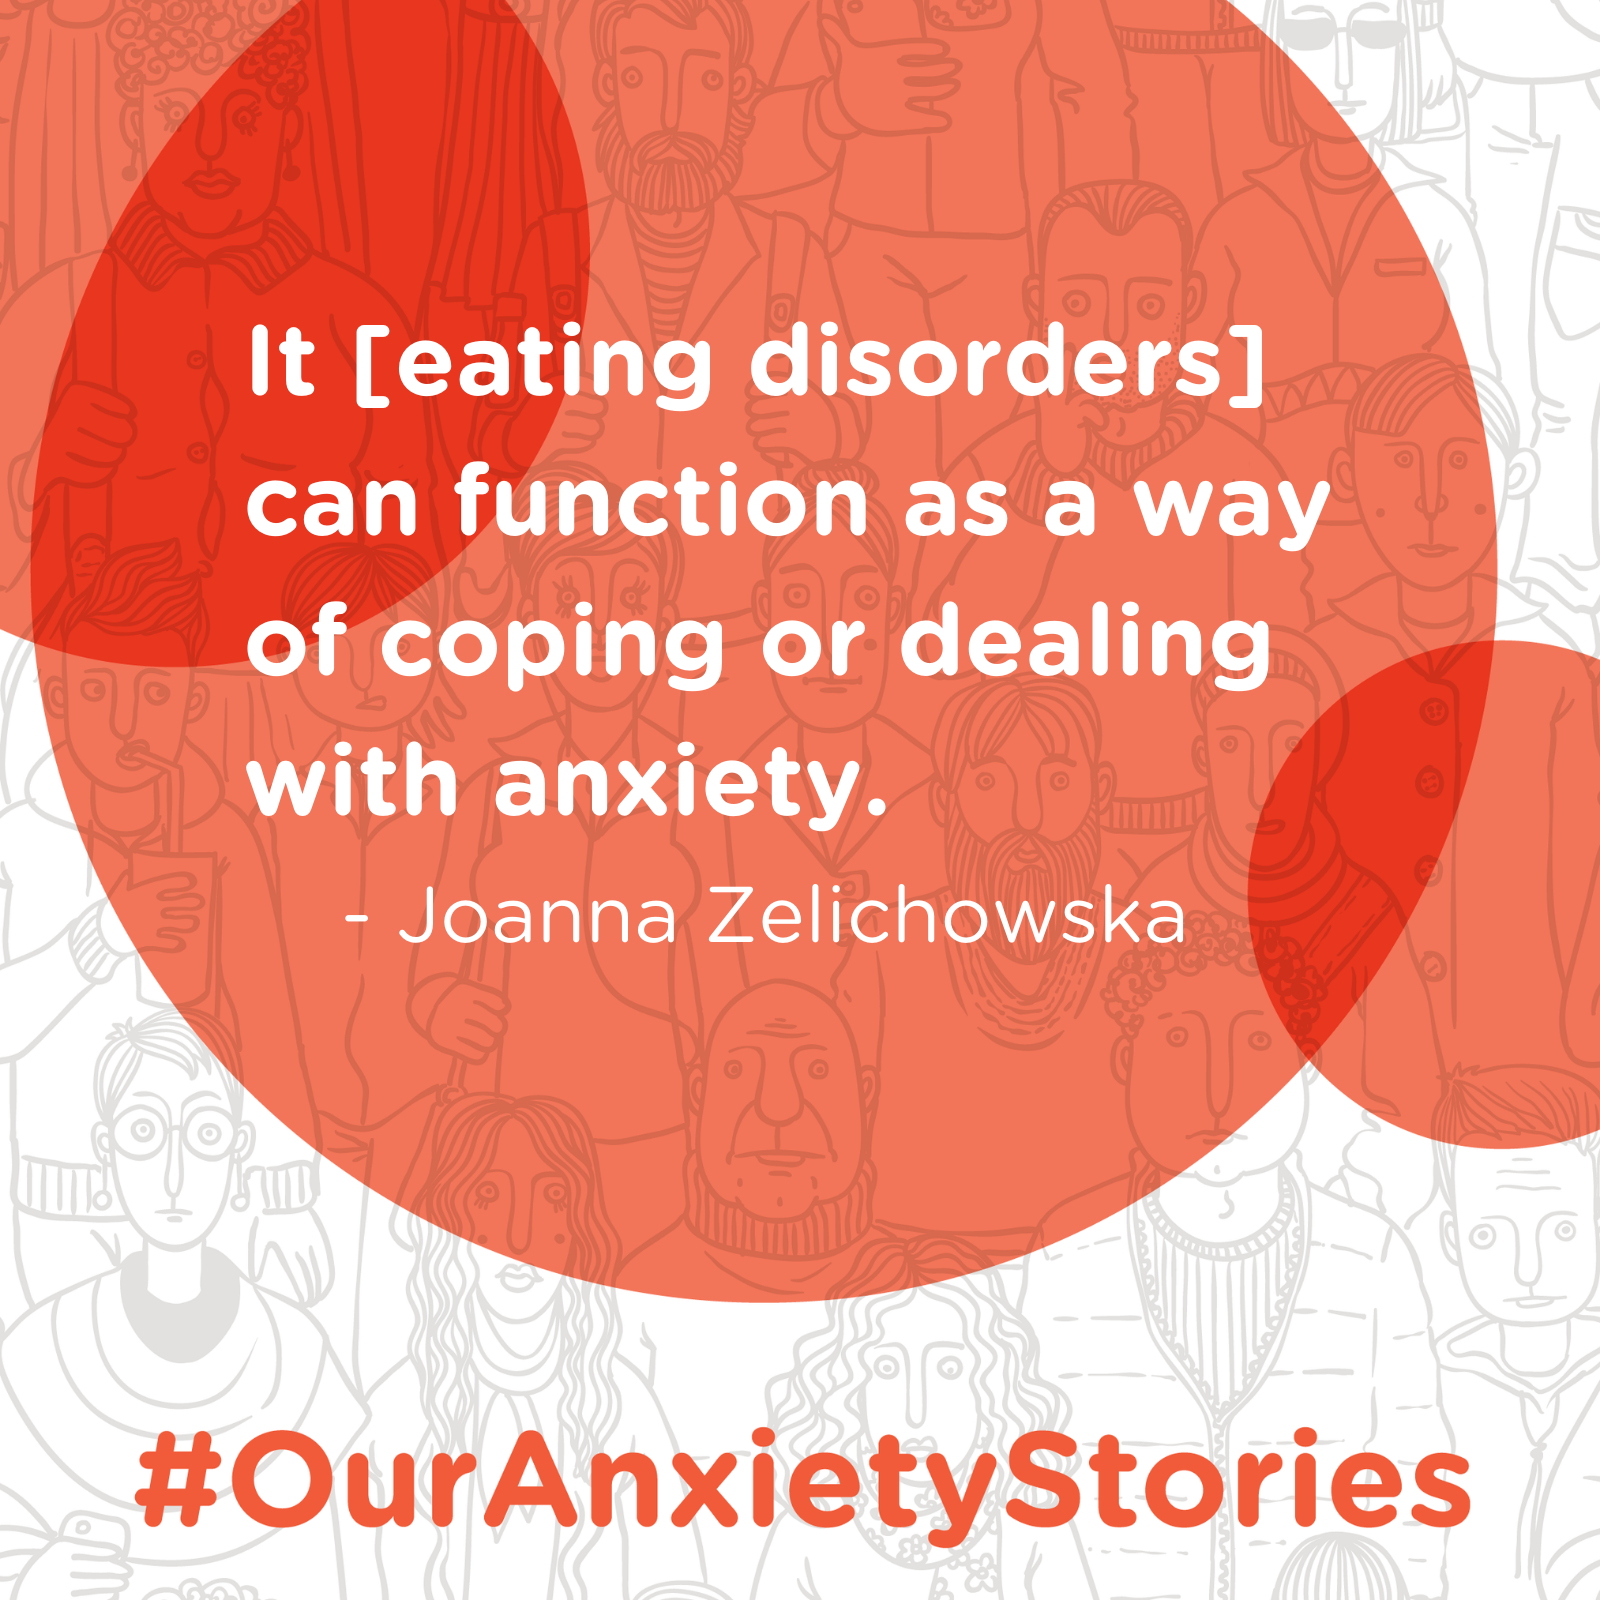 Anxiety and Eating Disorders with Joanna Zelichowska